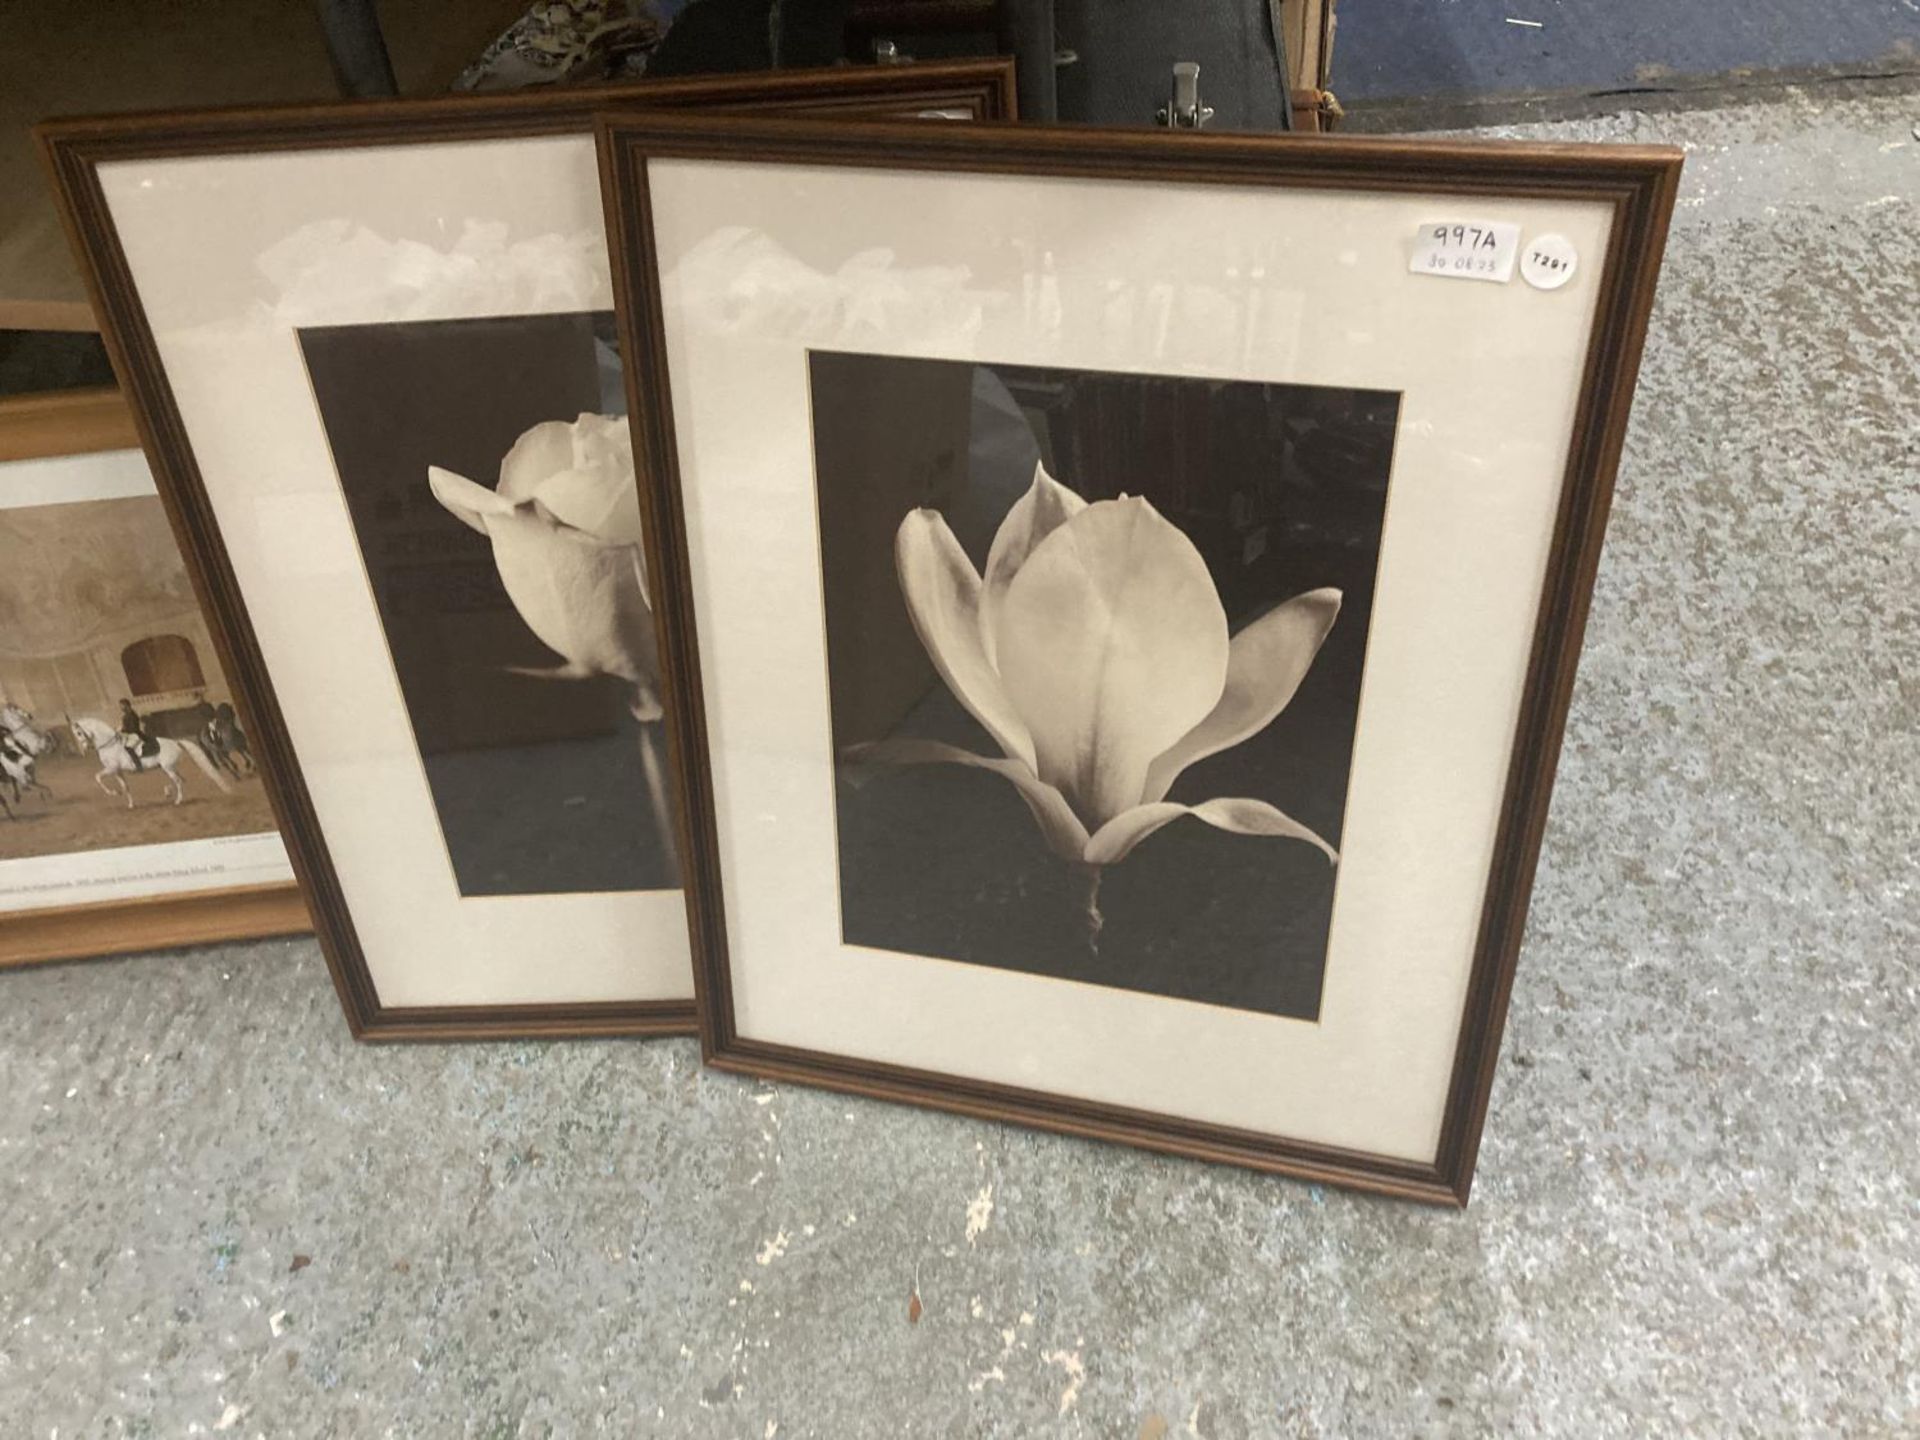 A PAIR OF FRAMED BLACK AND WHITE FLOWER PRINTS